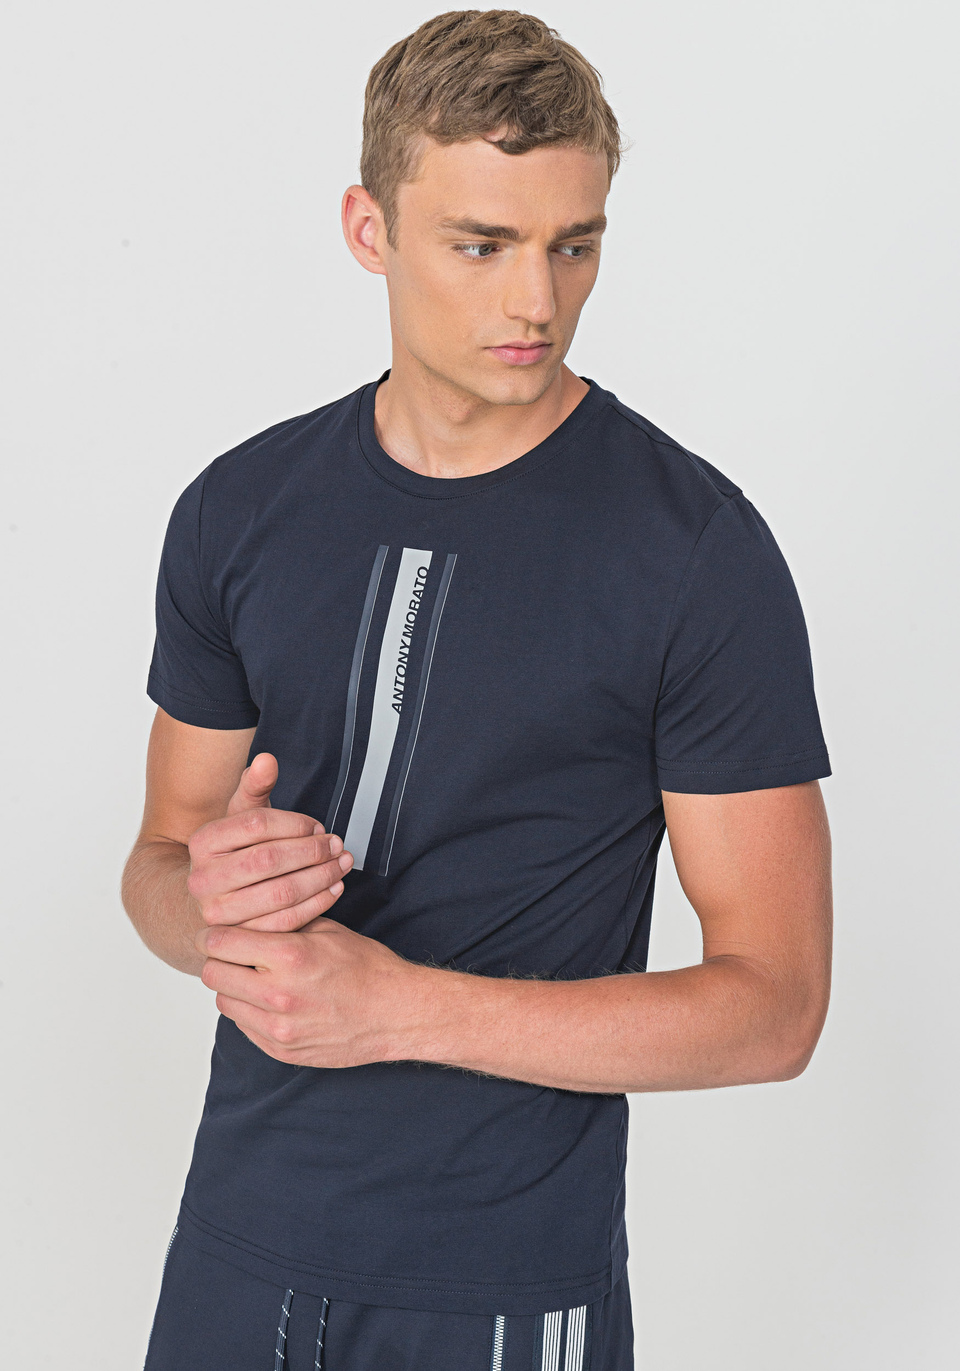 REGULAR-FIT T-SHIRT IN 100% SOFT COTTON WITH VERTICAL PRINT - Antony Morato Online Shop